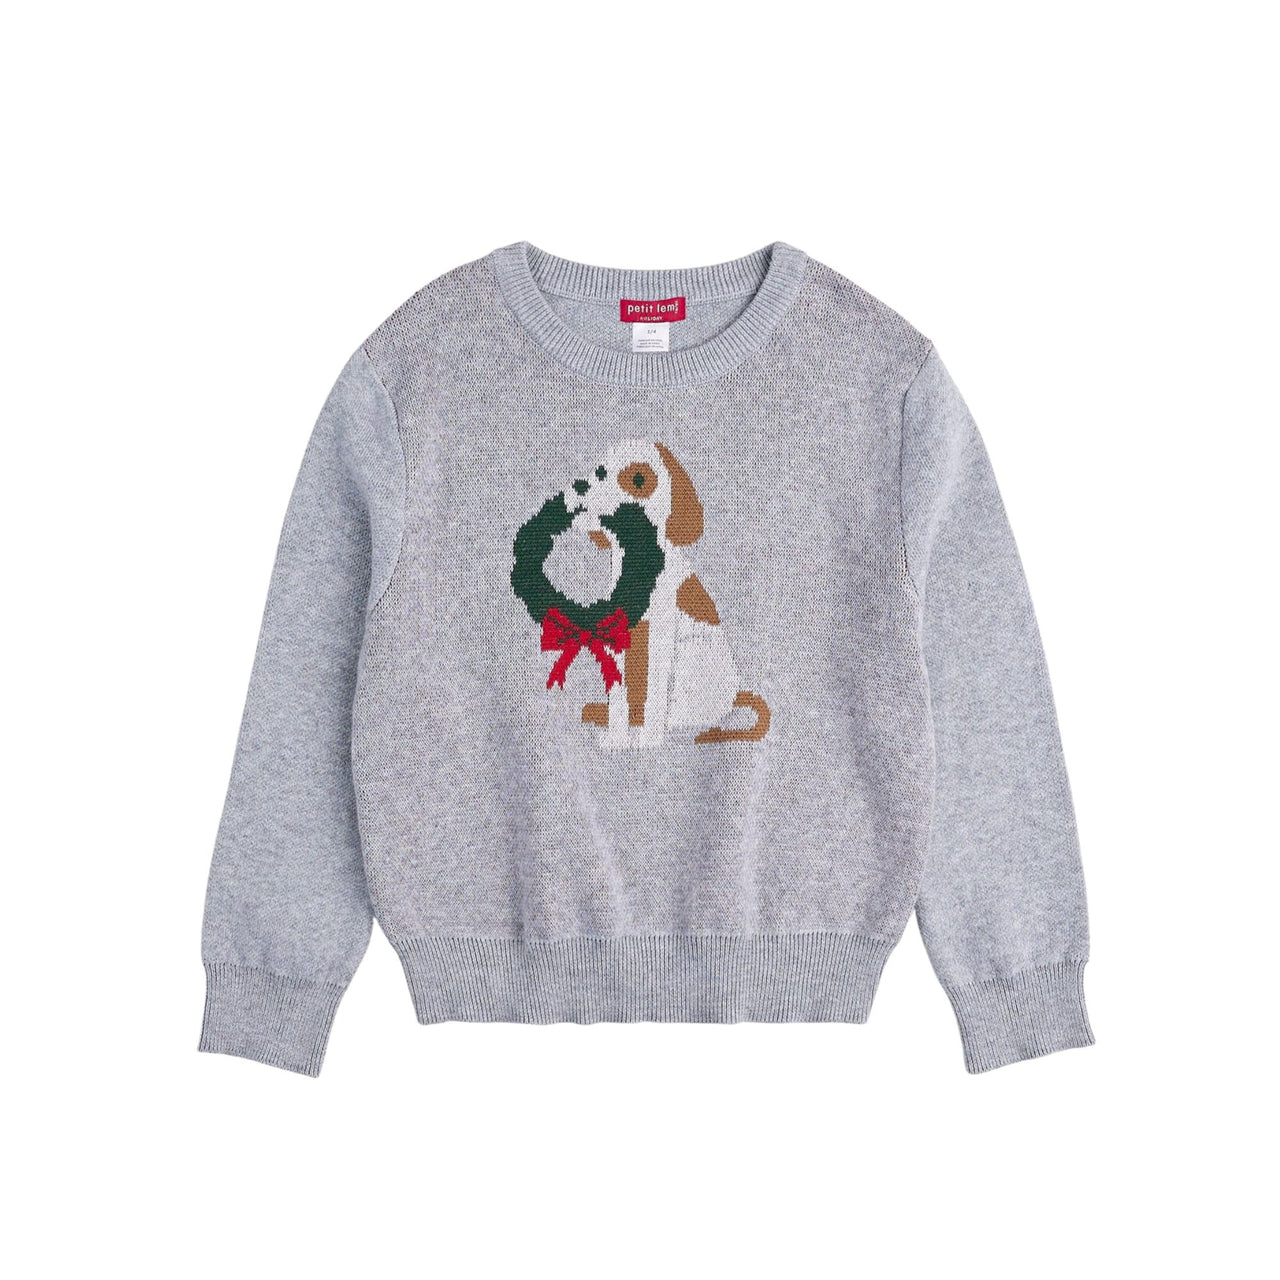 Spot with Wreath Heather Grey Knit Sweater